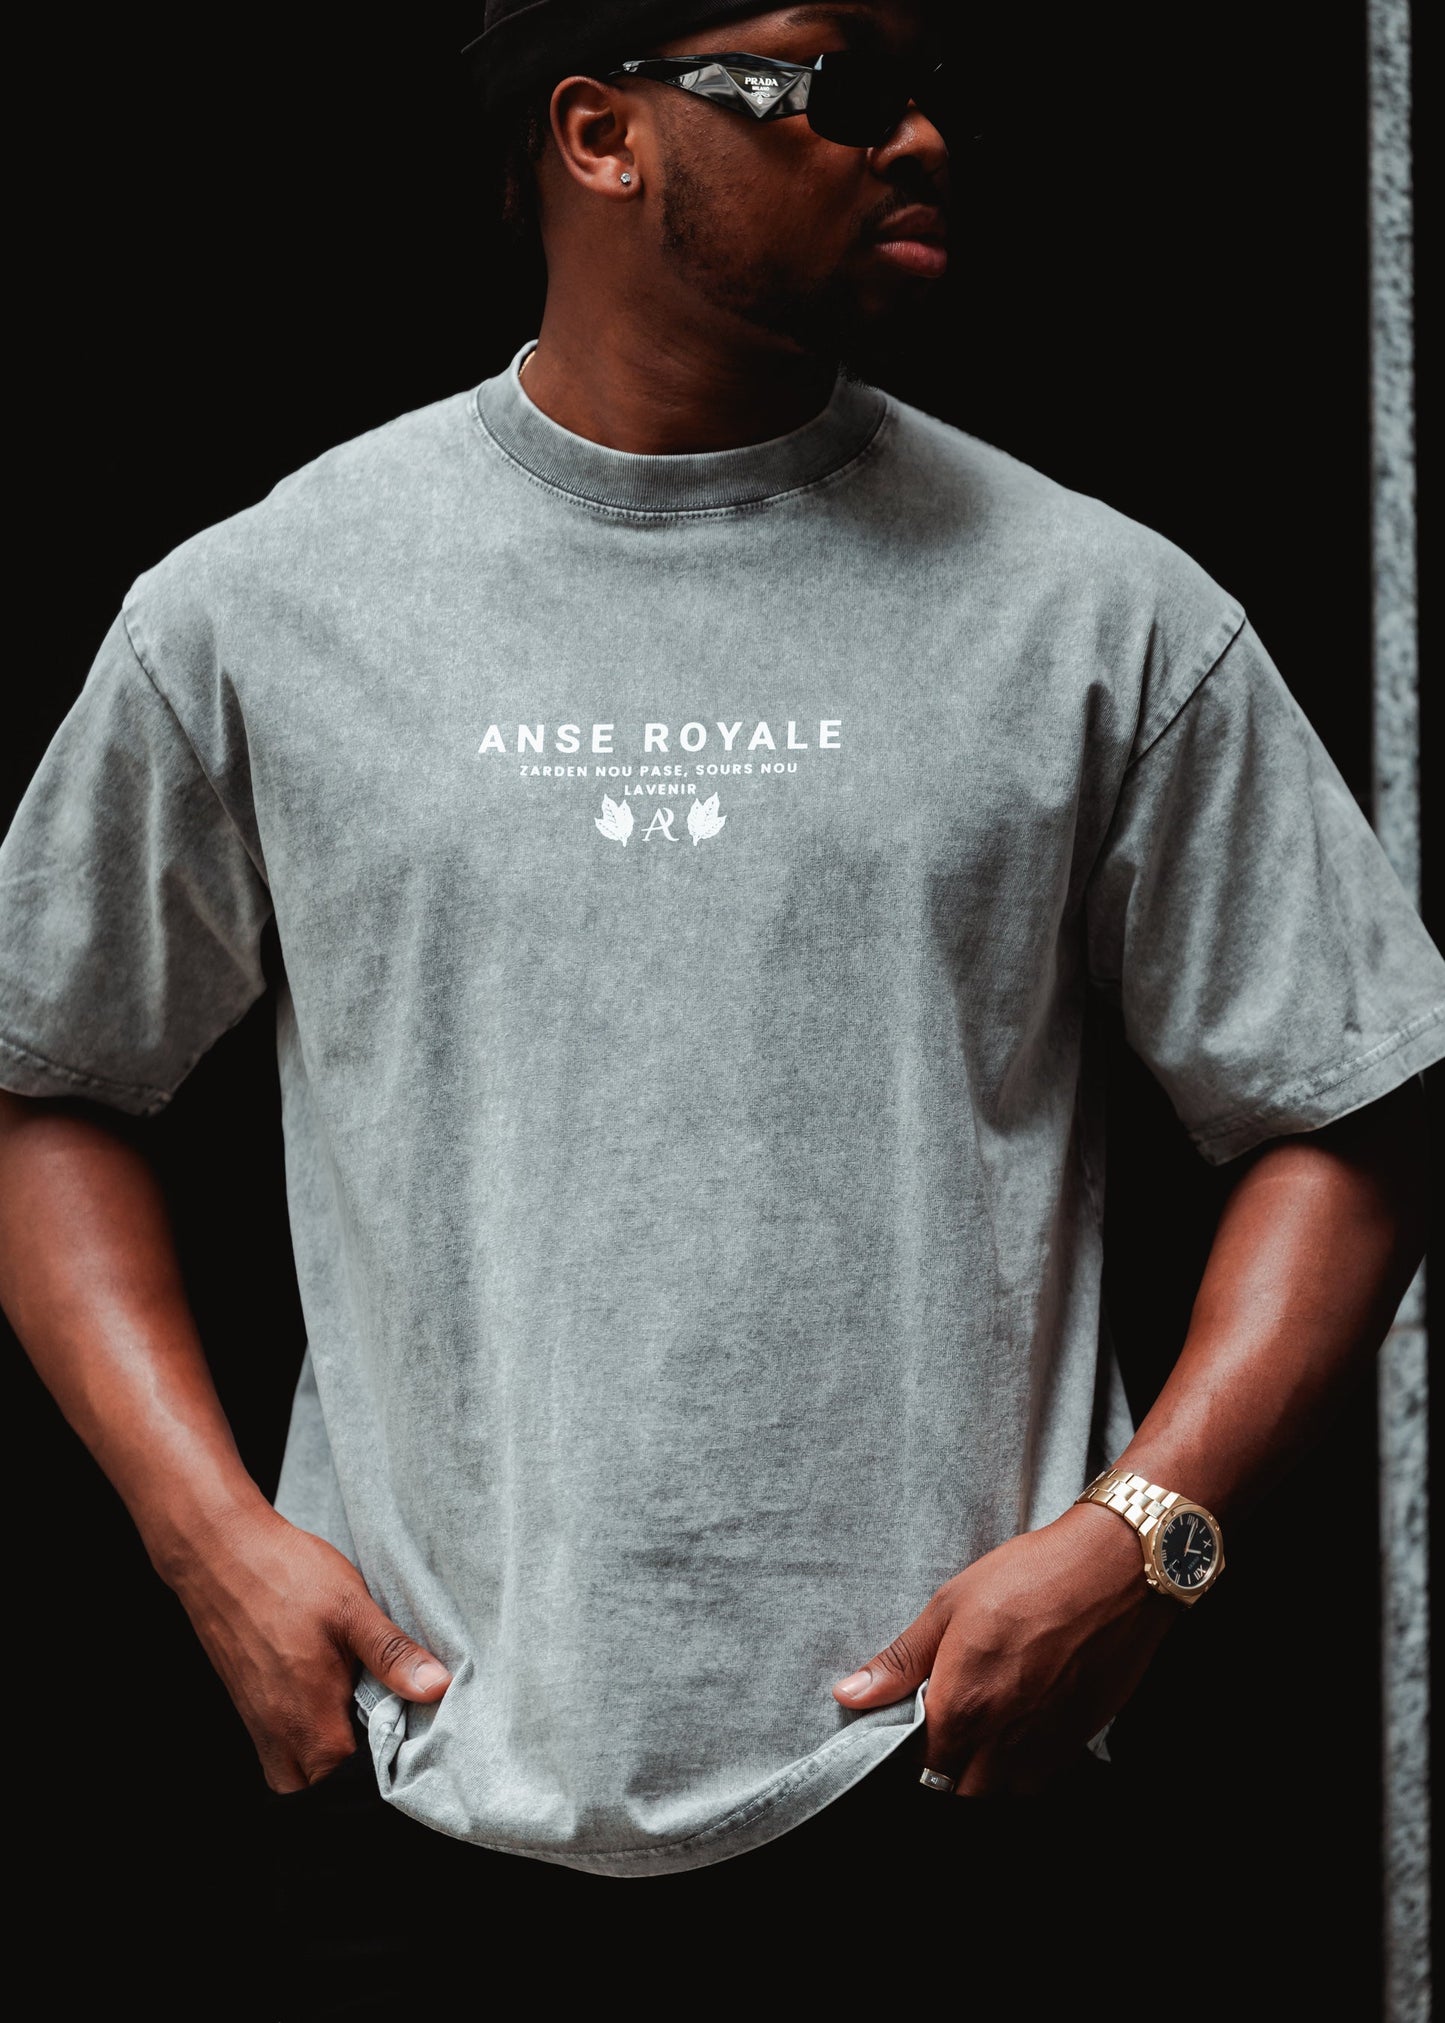 ZARDEN - Premium Shirts & Tops from ANSE ROYALE - Just $50! Shop now at ANSE ROYALE